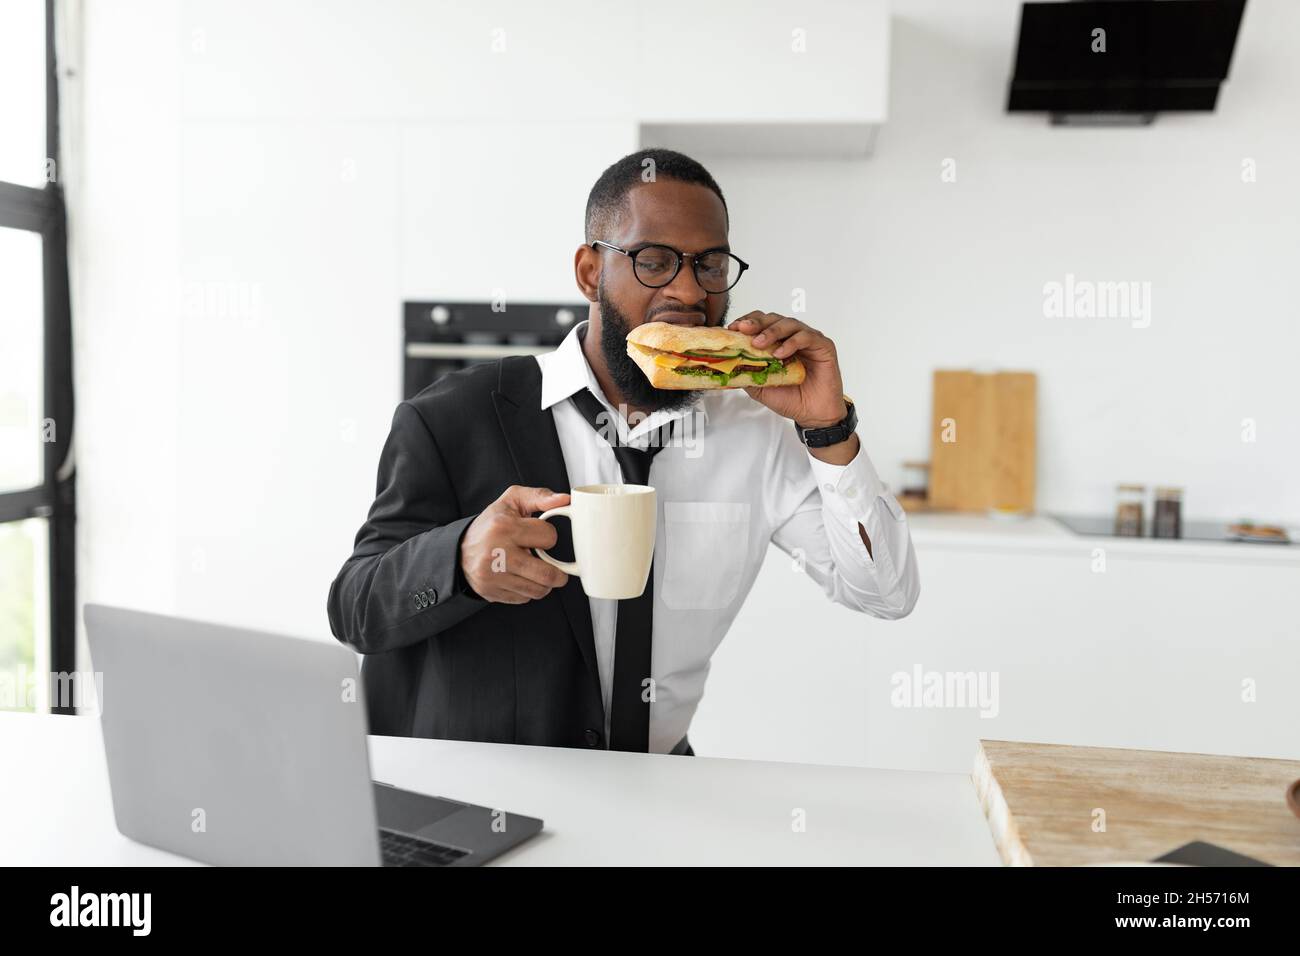 Black man rushing to work eating sandwich at home Stock Photo